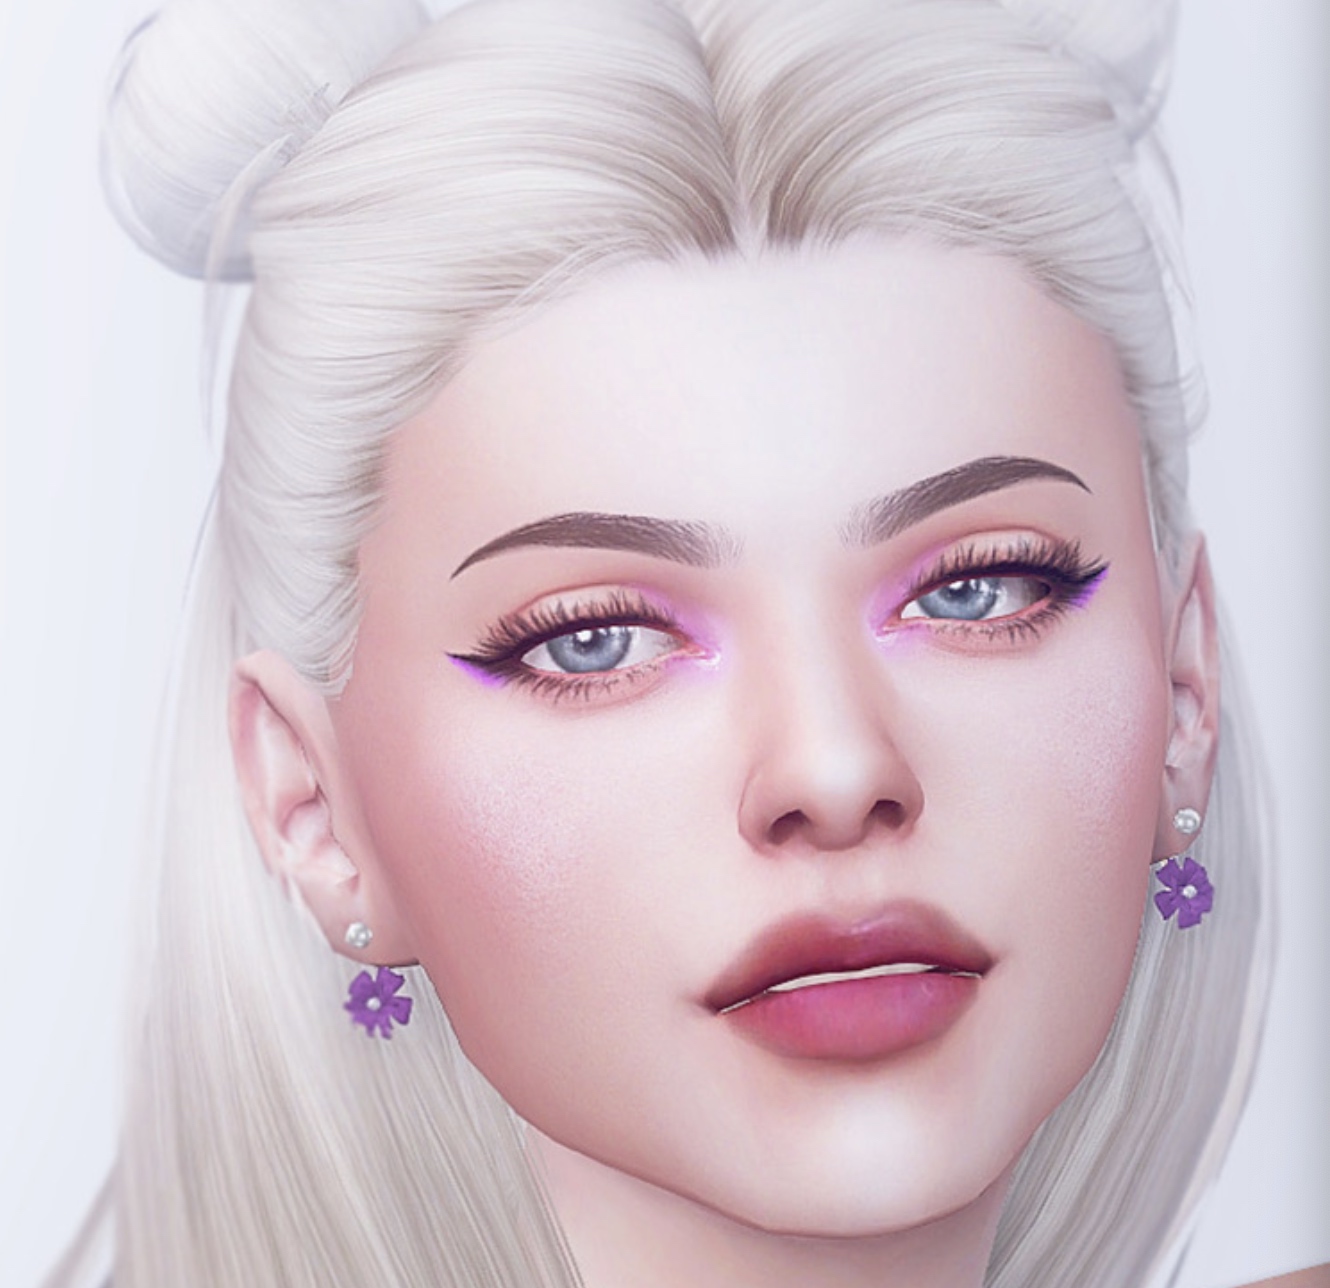 [Top 25] The Sims 4 Best Beauty Mods Everyone Should Use | GAMERS DECIDE